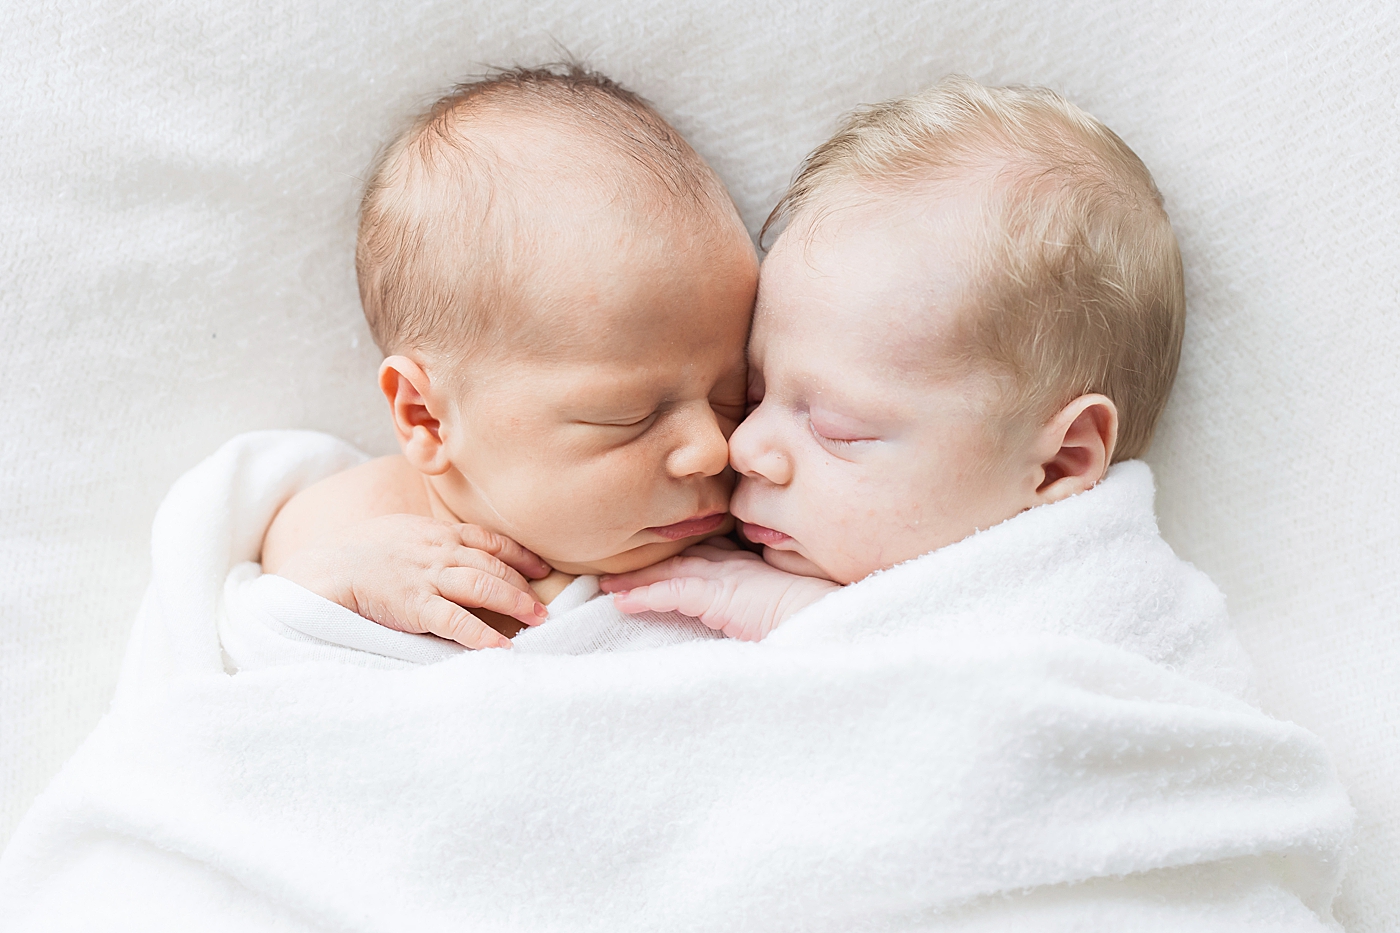 Twins snuggled up to each other during newborn session. Photos by Fresh Light Photography.